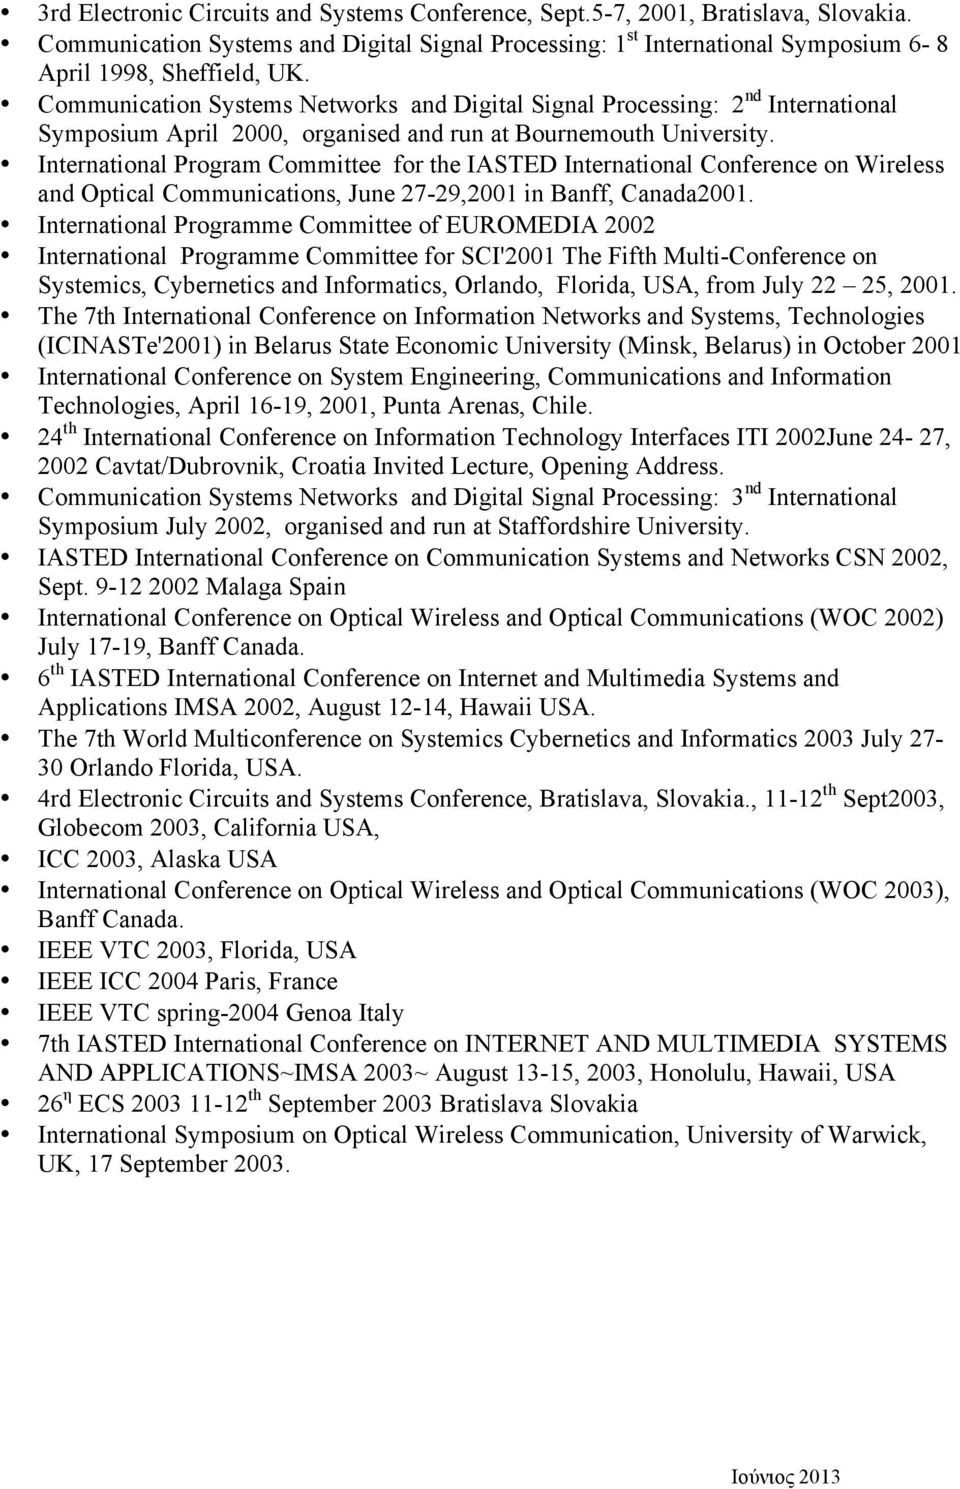 International Program Committee for the IASTED International Conference on Wireless and Optical Communications, June 27-29,2001 in Banff, Canada2001.